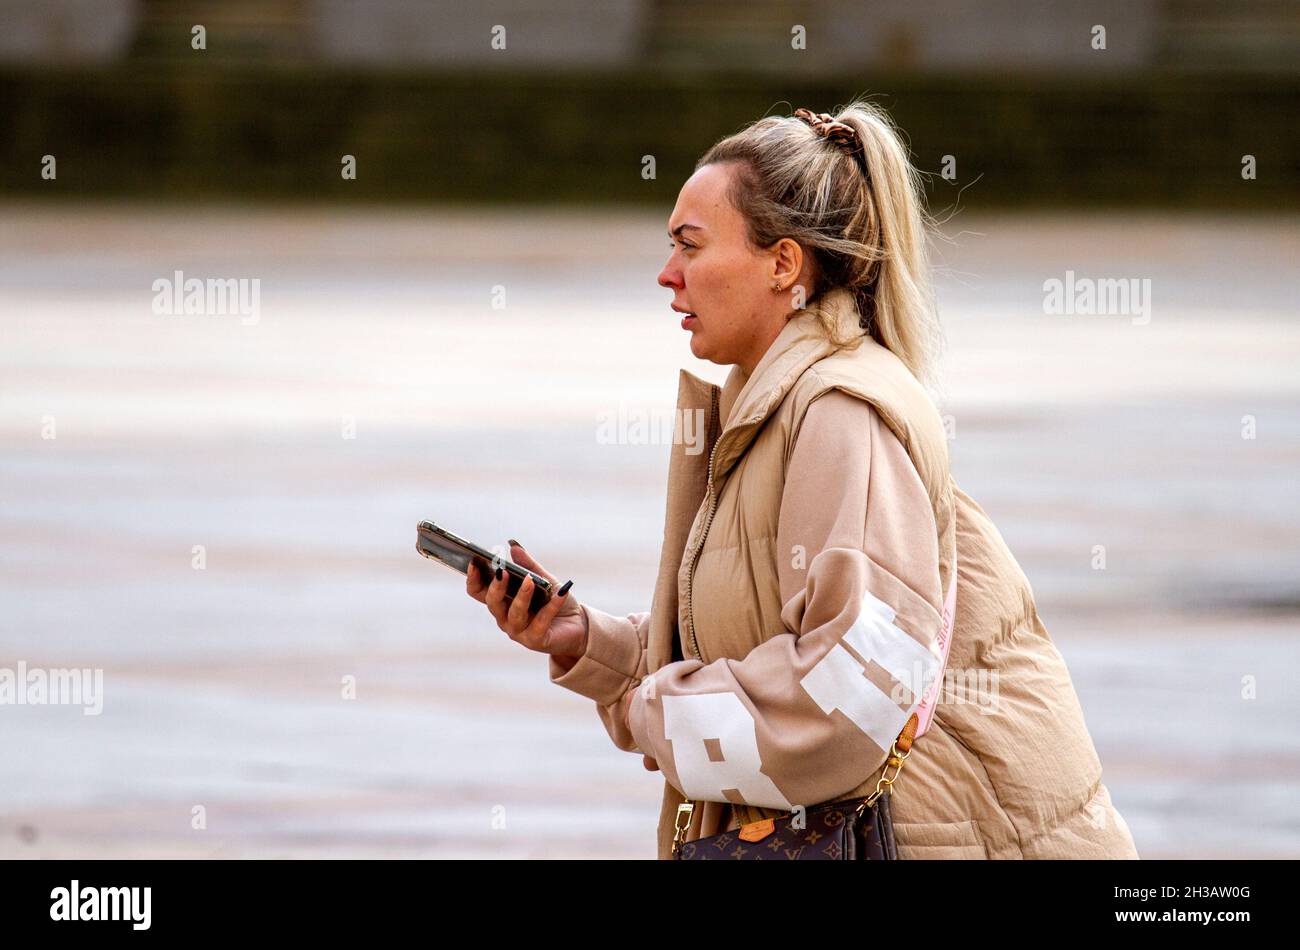 Dundee, Tayside, Scotland, UK. 27th Oct, 2021. UK Weather: A mild Autumn day with some sunny spells across North East Scotland, temperatures reaching 15°C. An attractive woman is spending the day out enjoying the October weather whilst texting messages on her mobile phone in Dundee city centre. Credit: Dundee Photographics/Alamy Live News Stock Photo